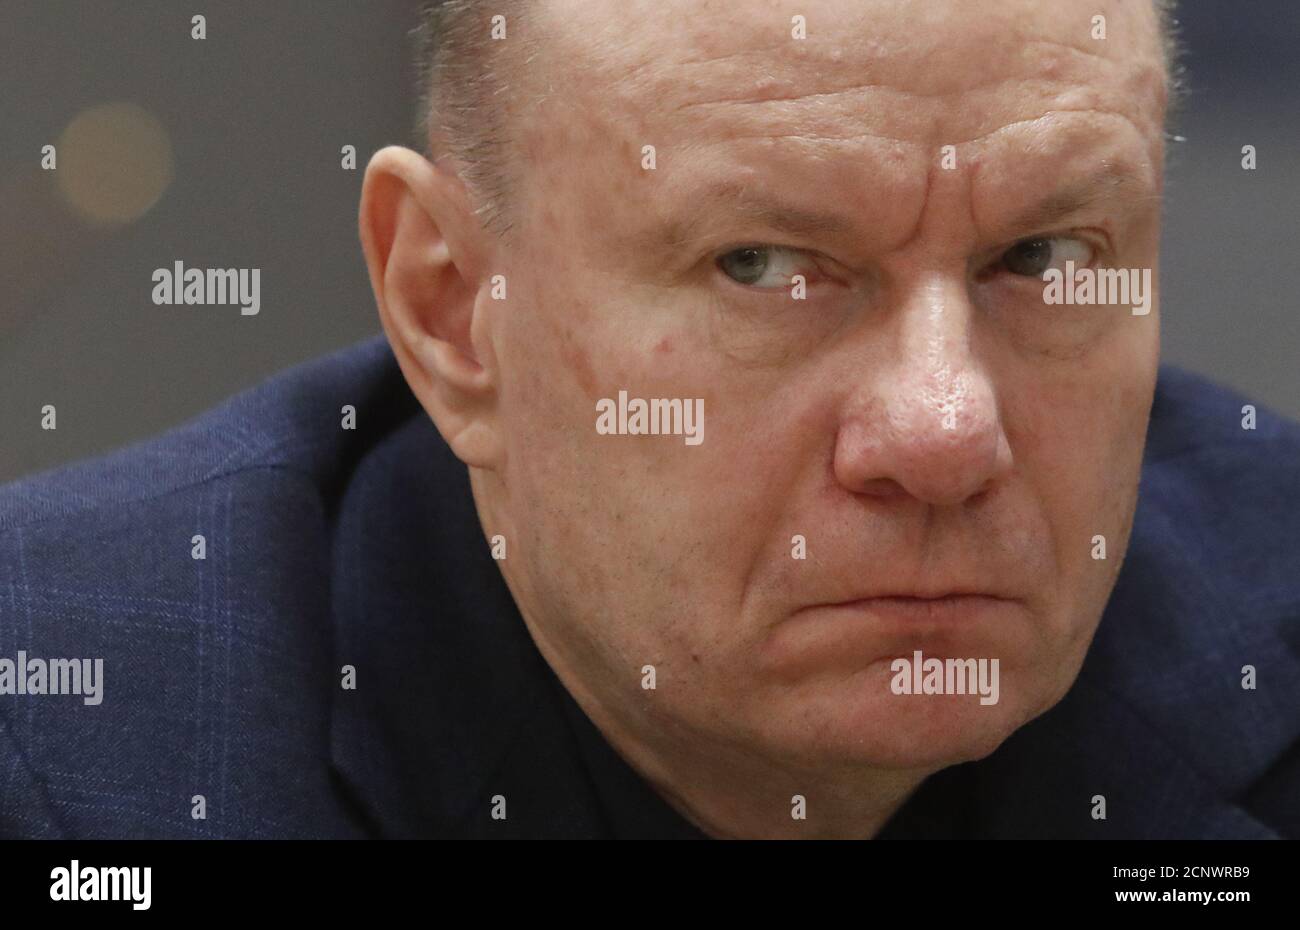 Vladimir Potanin, co-owner of Norilsk Nickel, attends an agreement signing ceremony with the Krasnoyarsk region's government, in Moscow, Russia December 12, 2017. REUTERS/Sergei Karpukhin Stock Photo